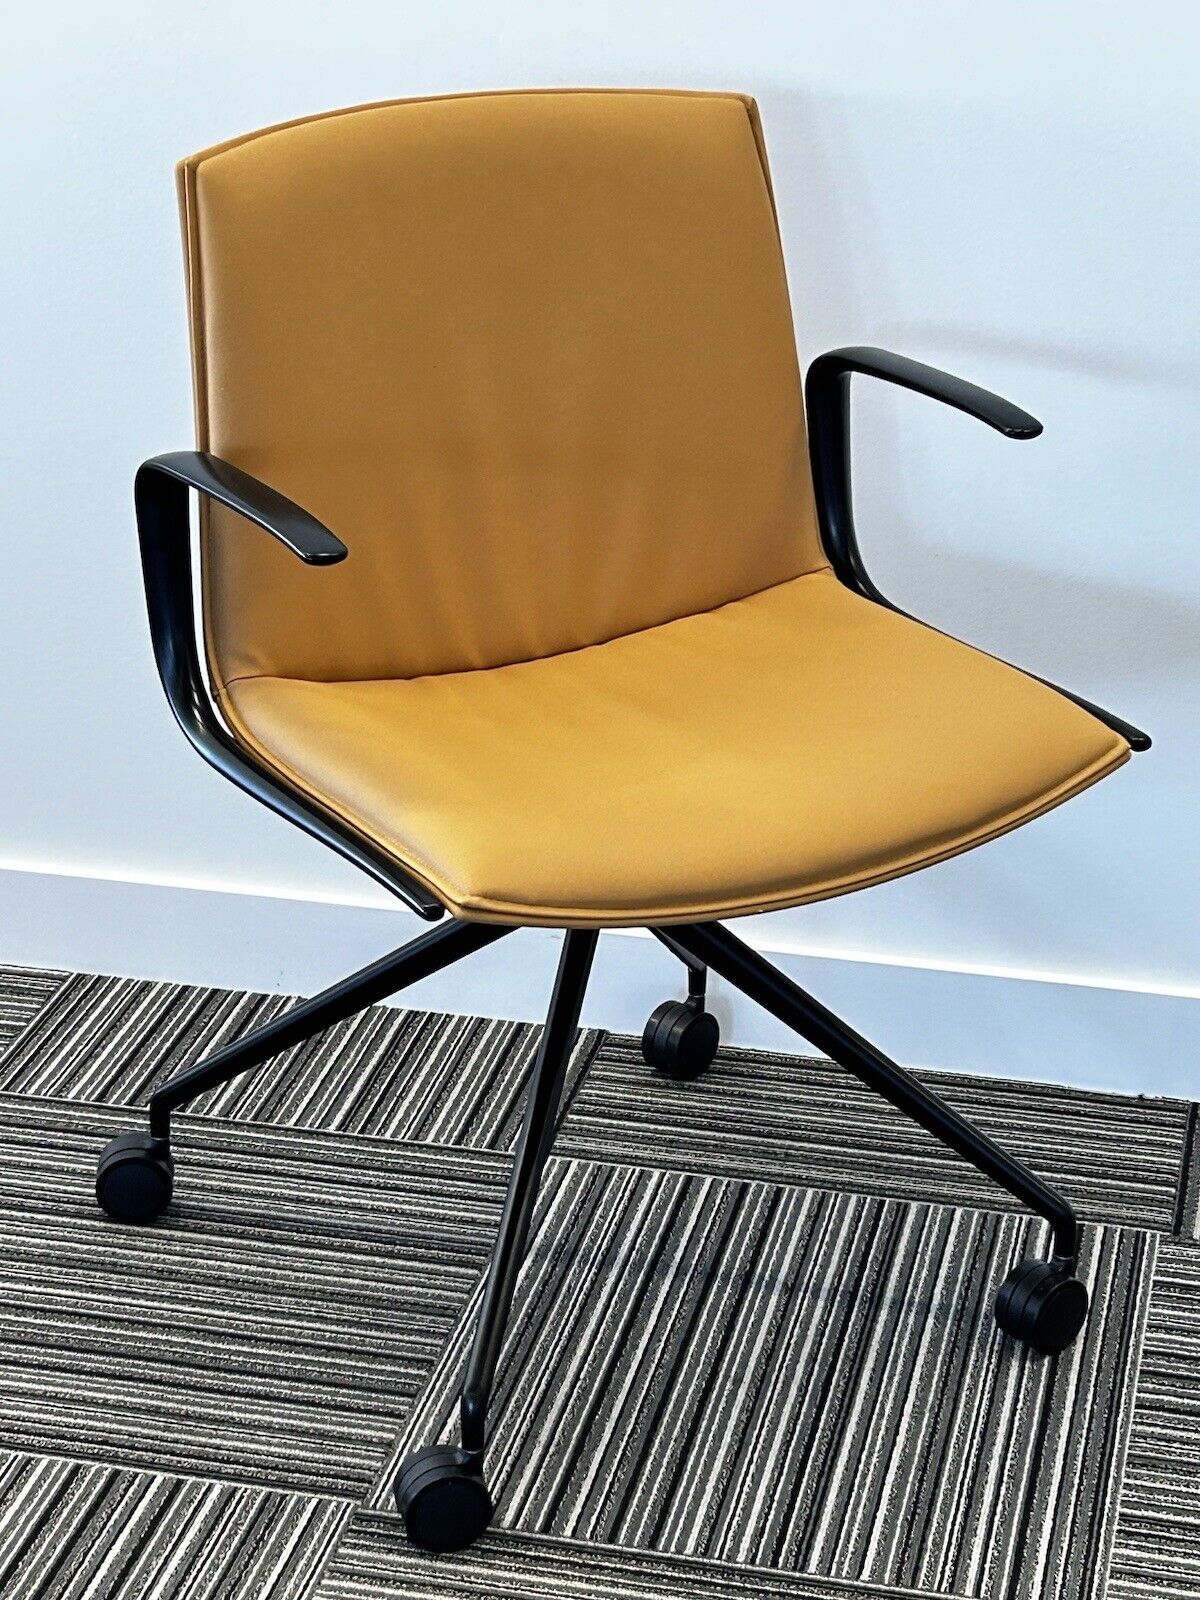 used conference room chairs